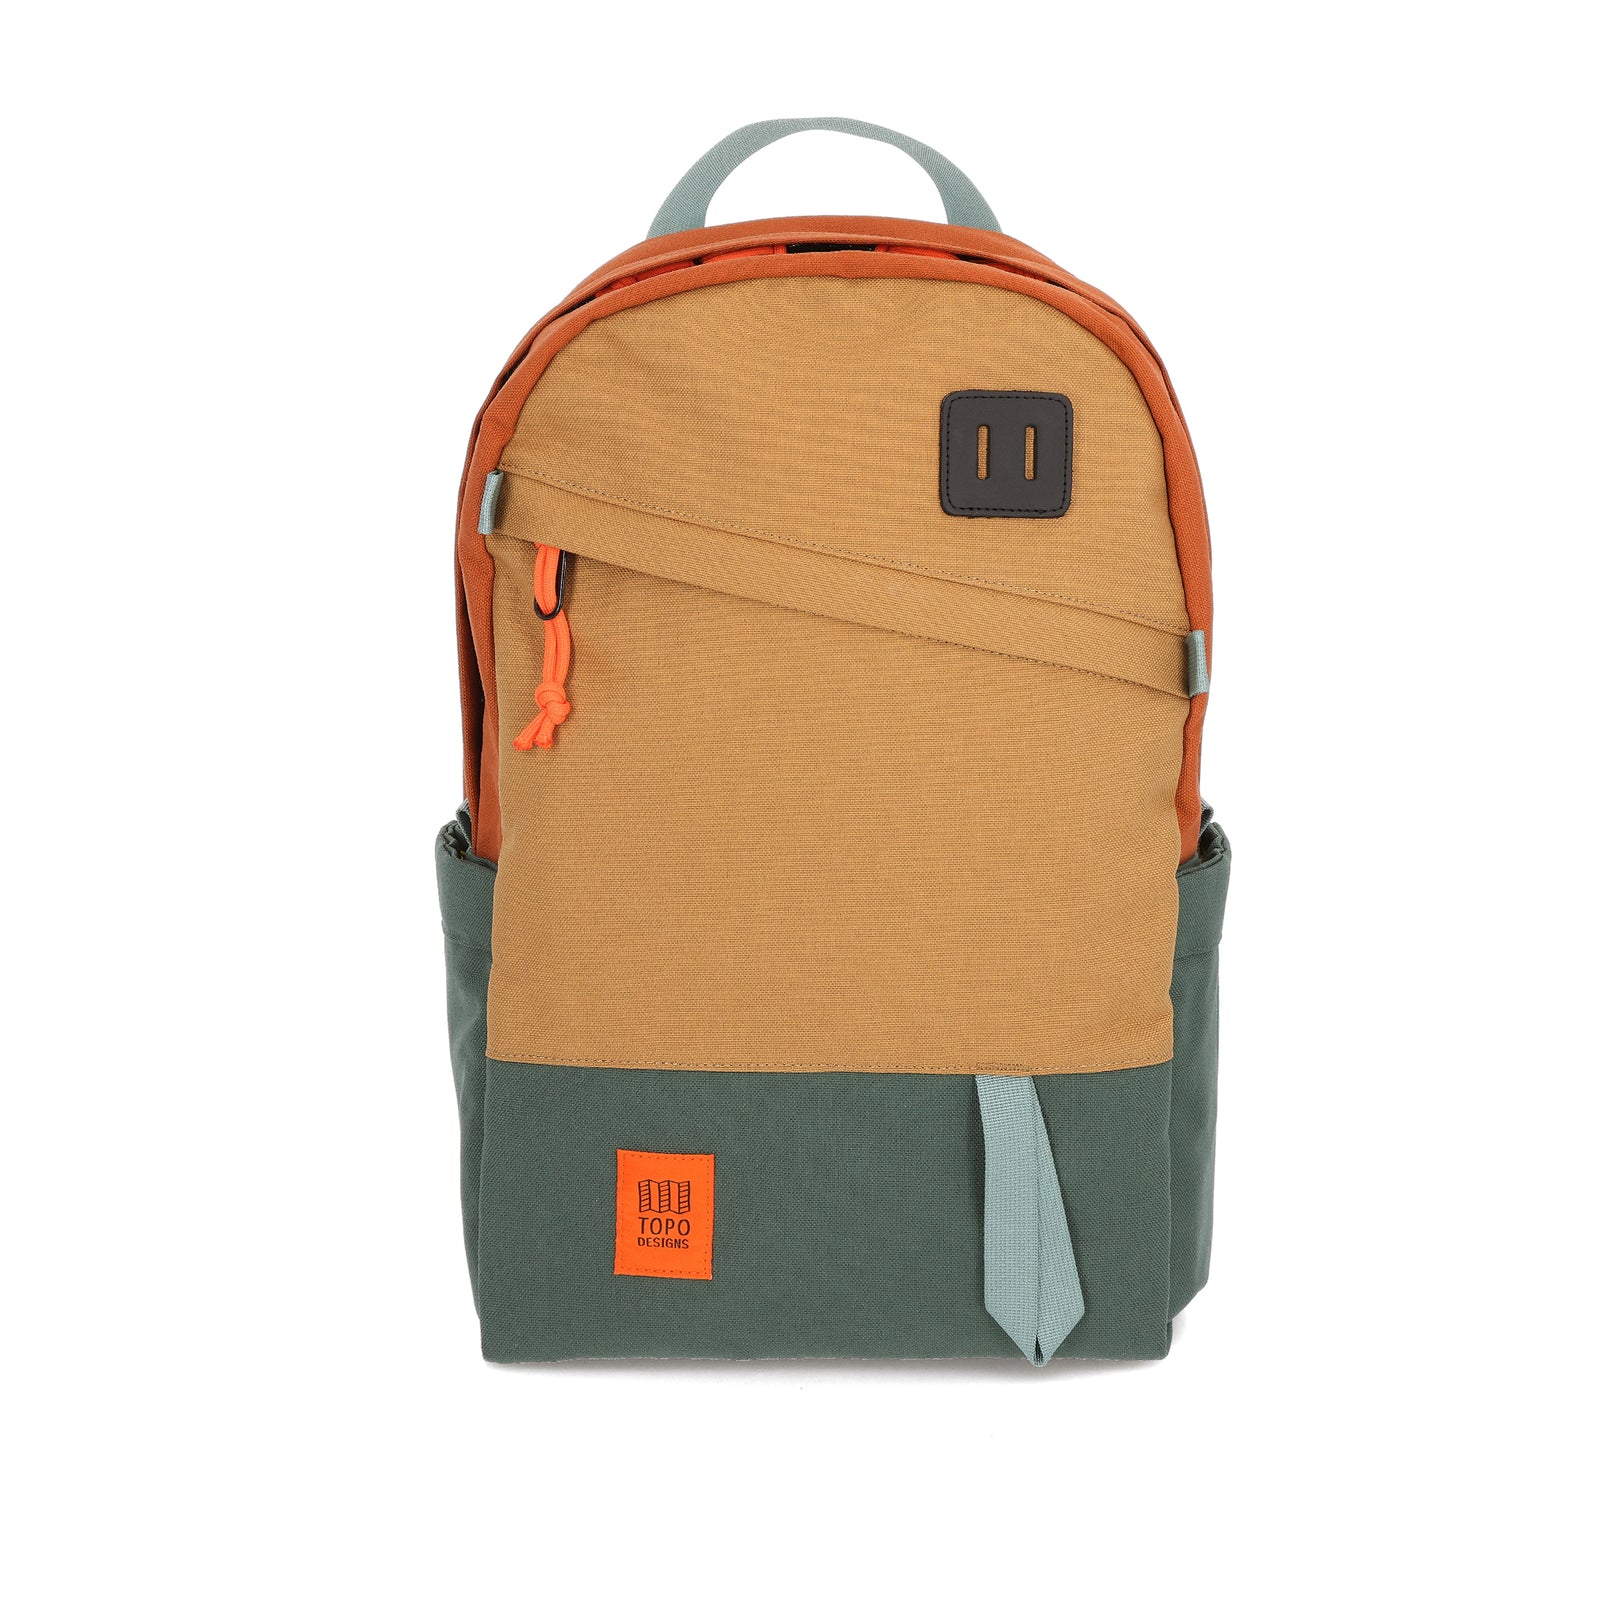 Topo Designs Daypack Classic 100% recycled nylon laptop backpack for work or school in "Khaki / Forest / Clay".